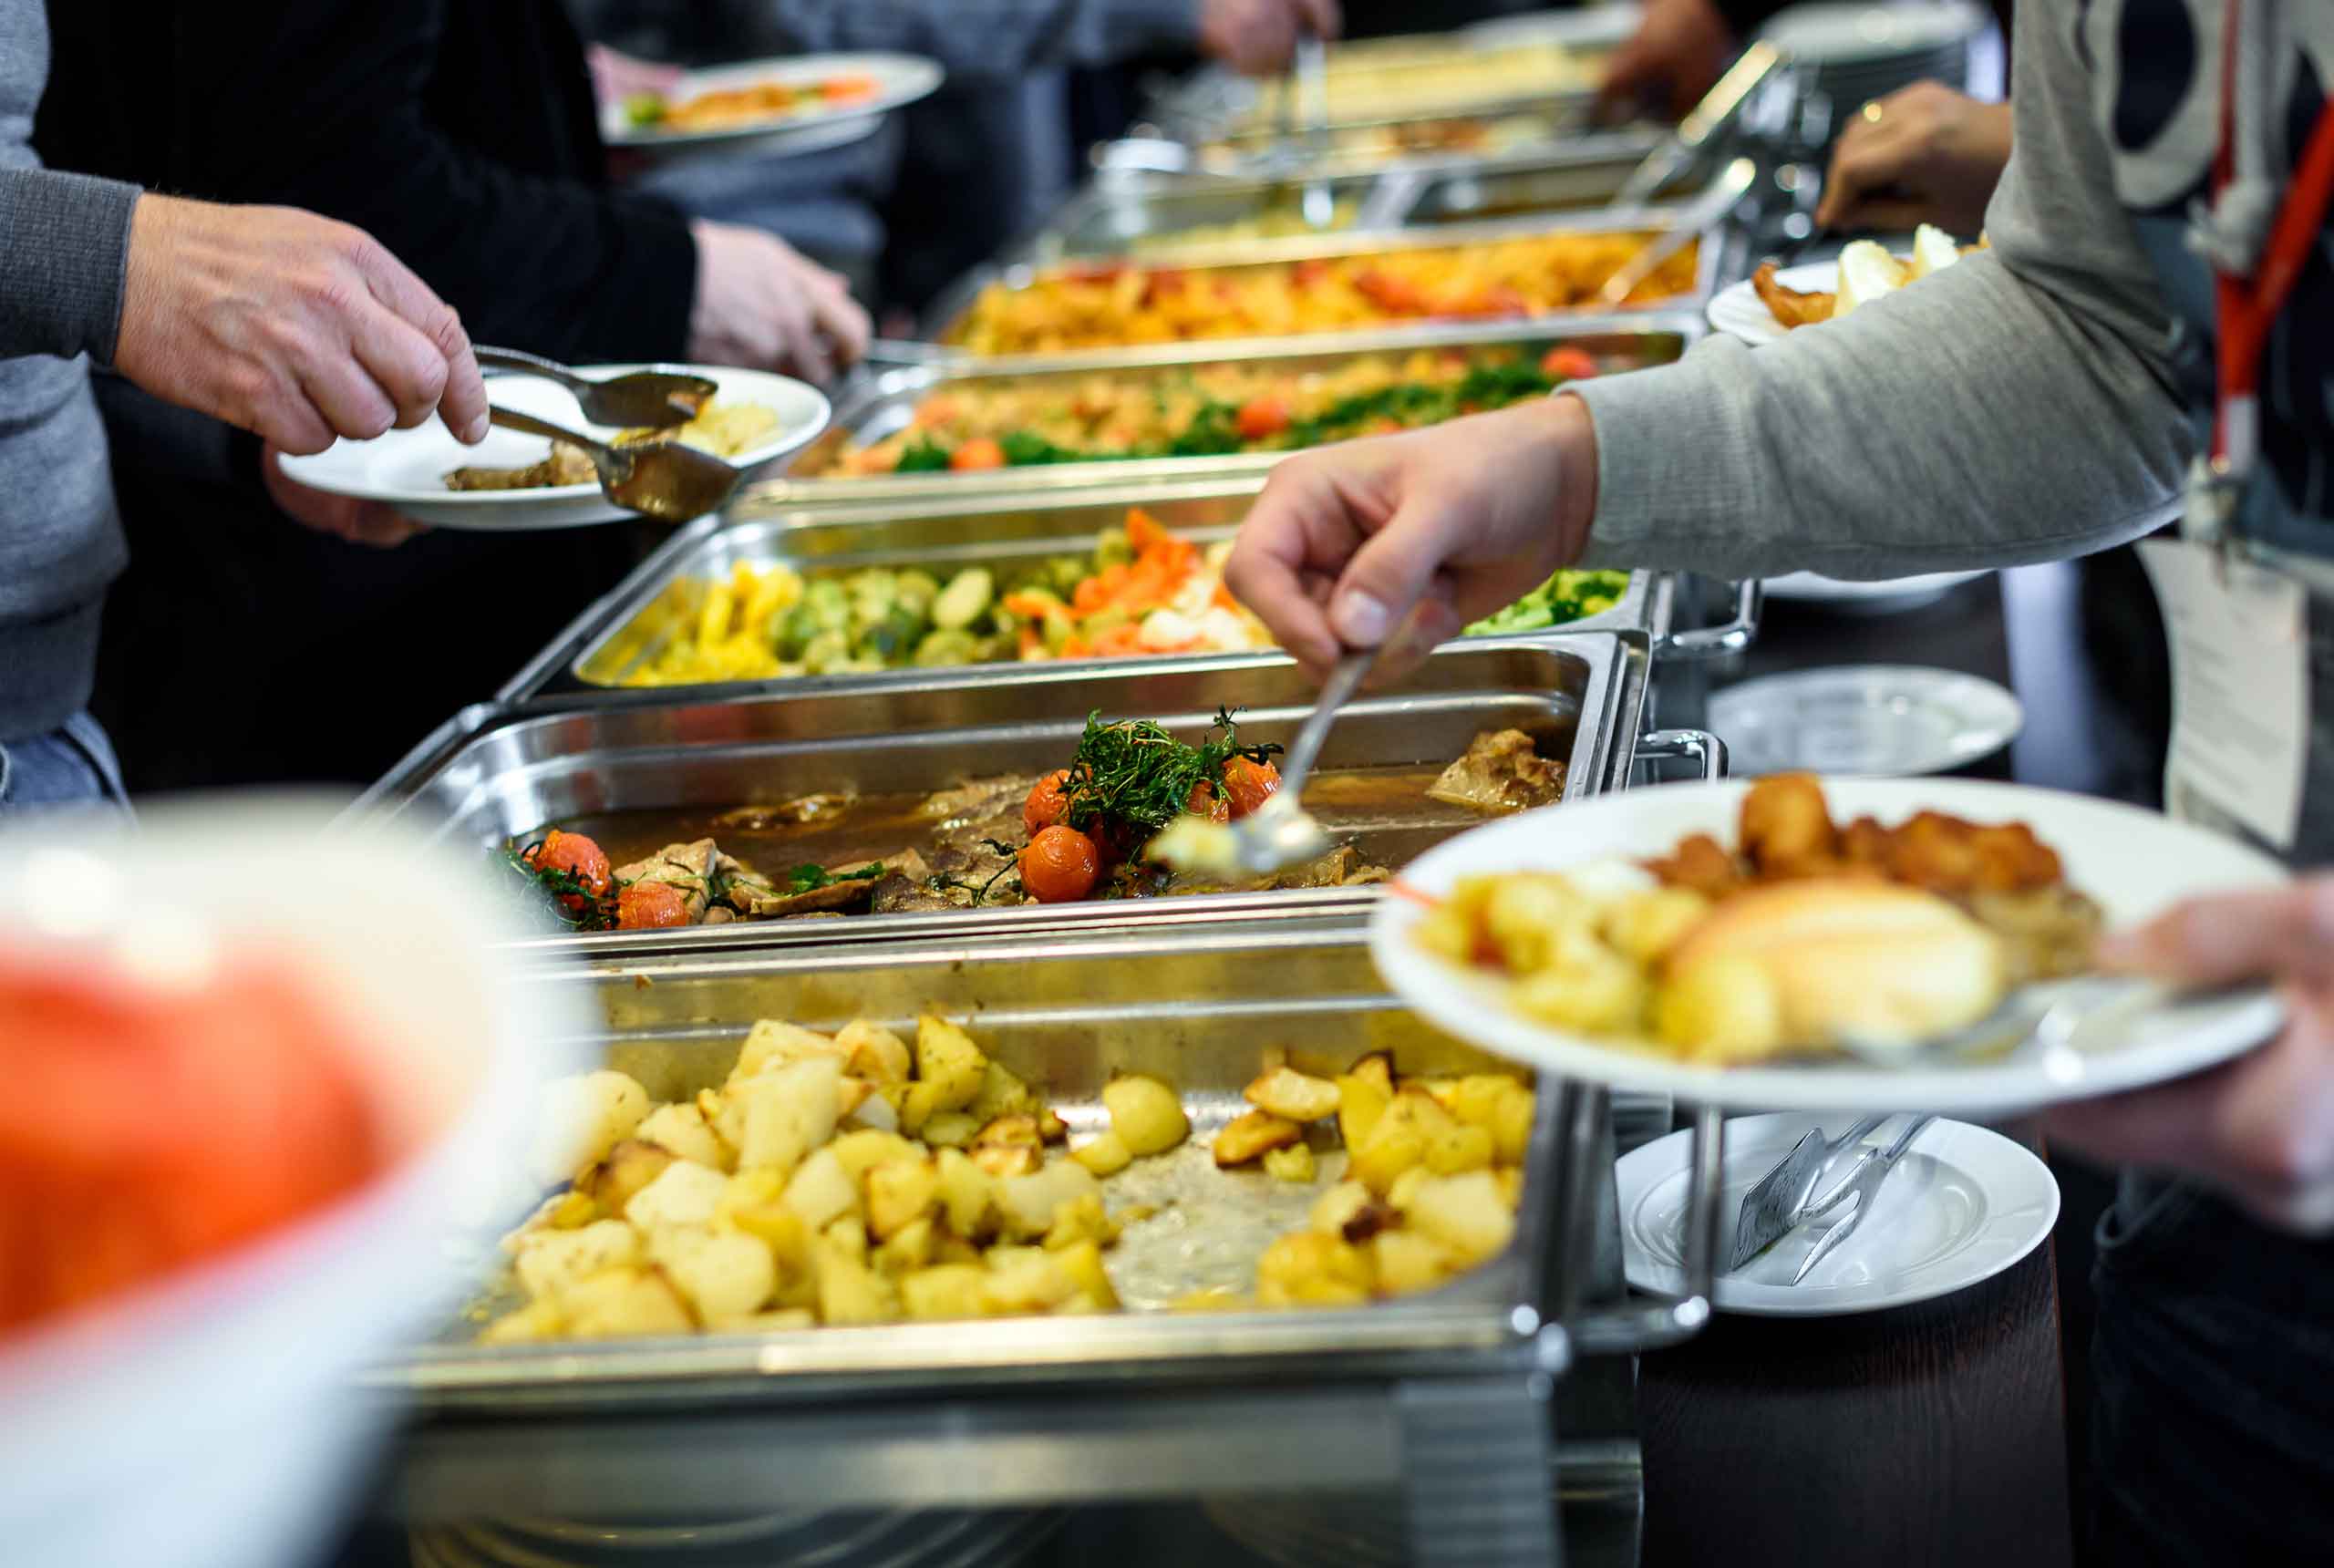 cafeteria buffet table with multiple prepared foods